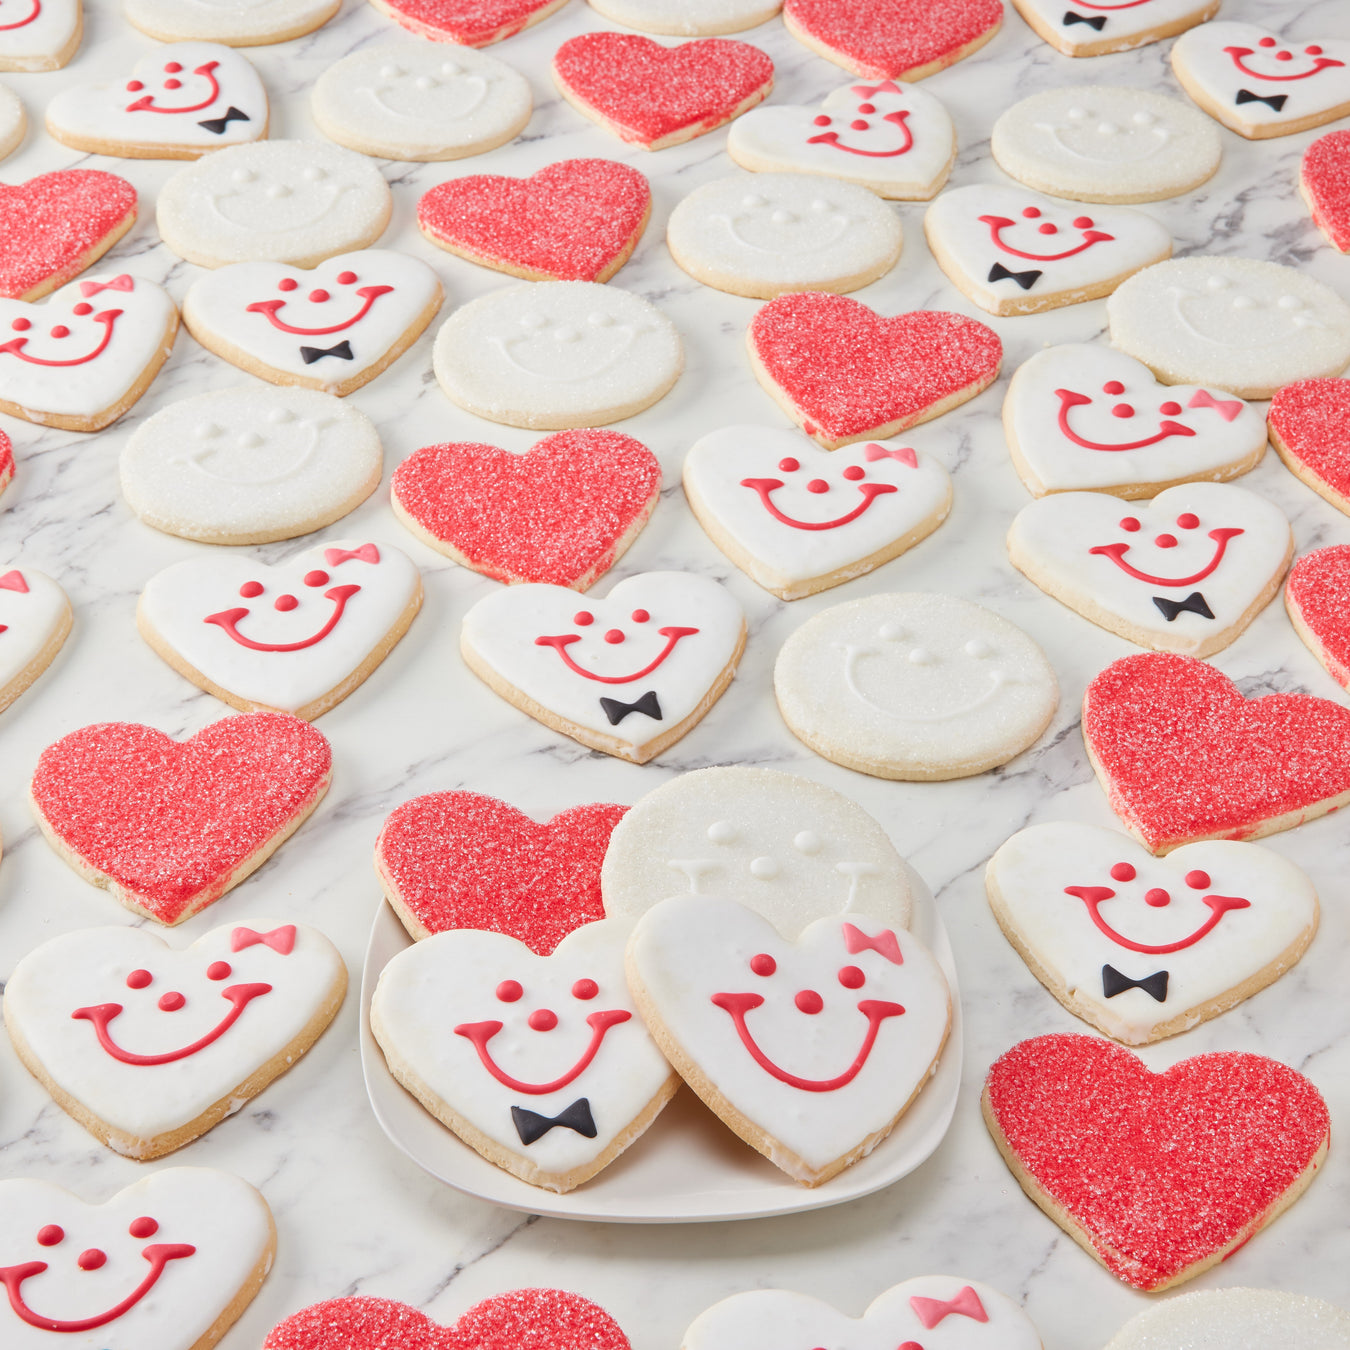 Wedding Cookie Table Variety Pack with Heart Bride and Groom Cookies